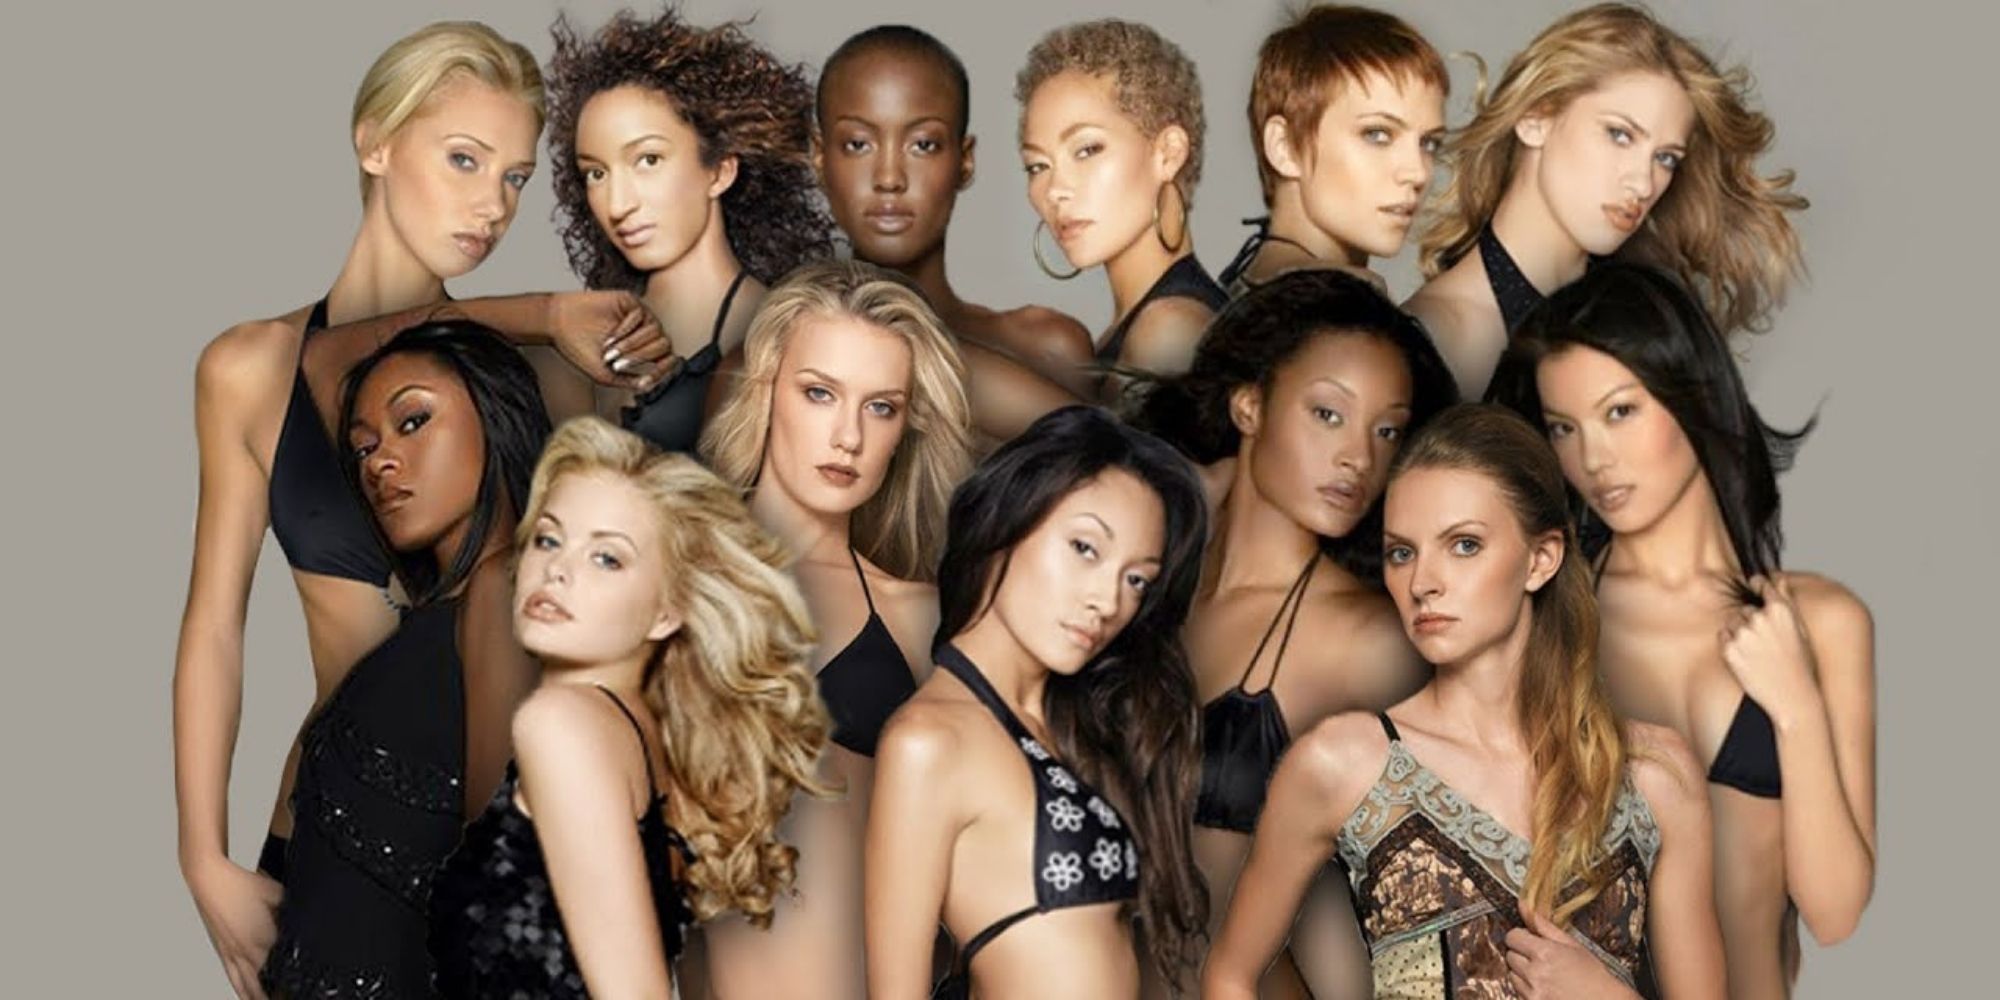 The cast of ANTM Cycle 6